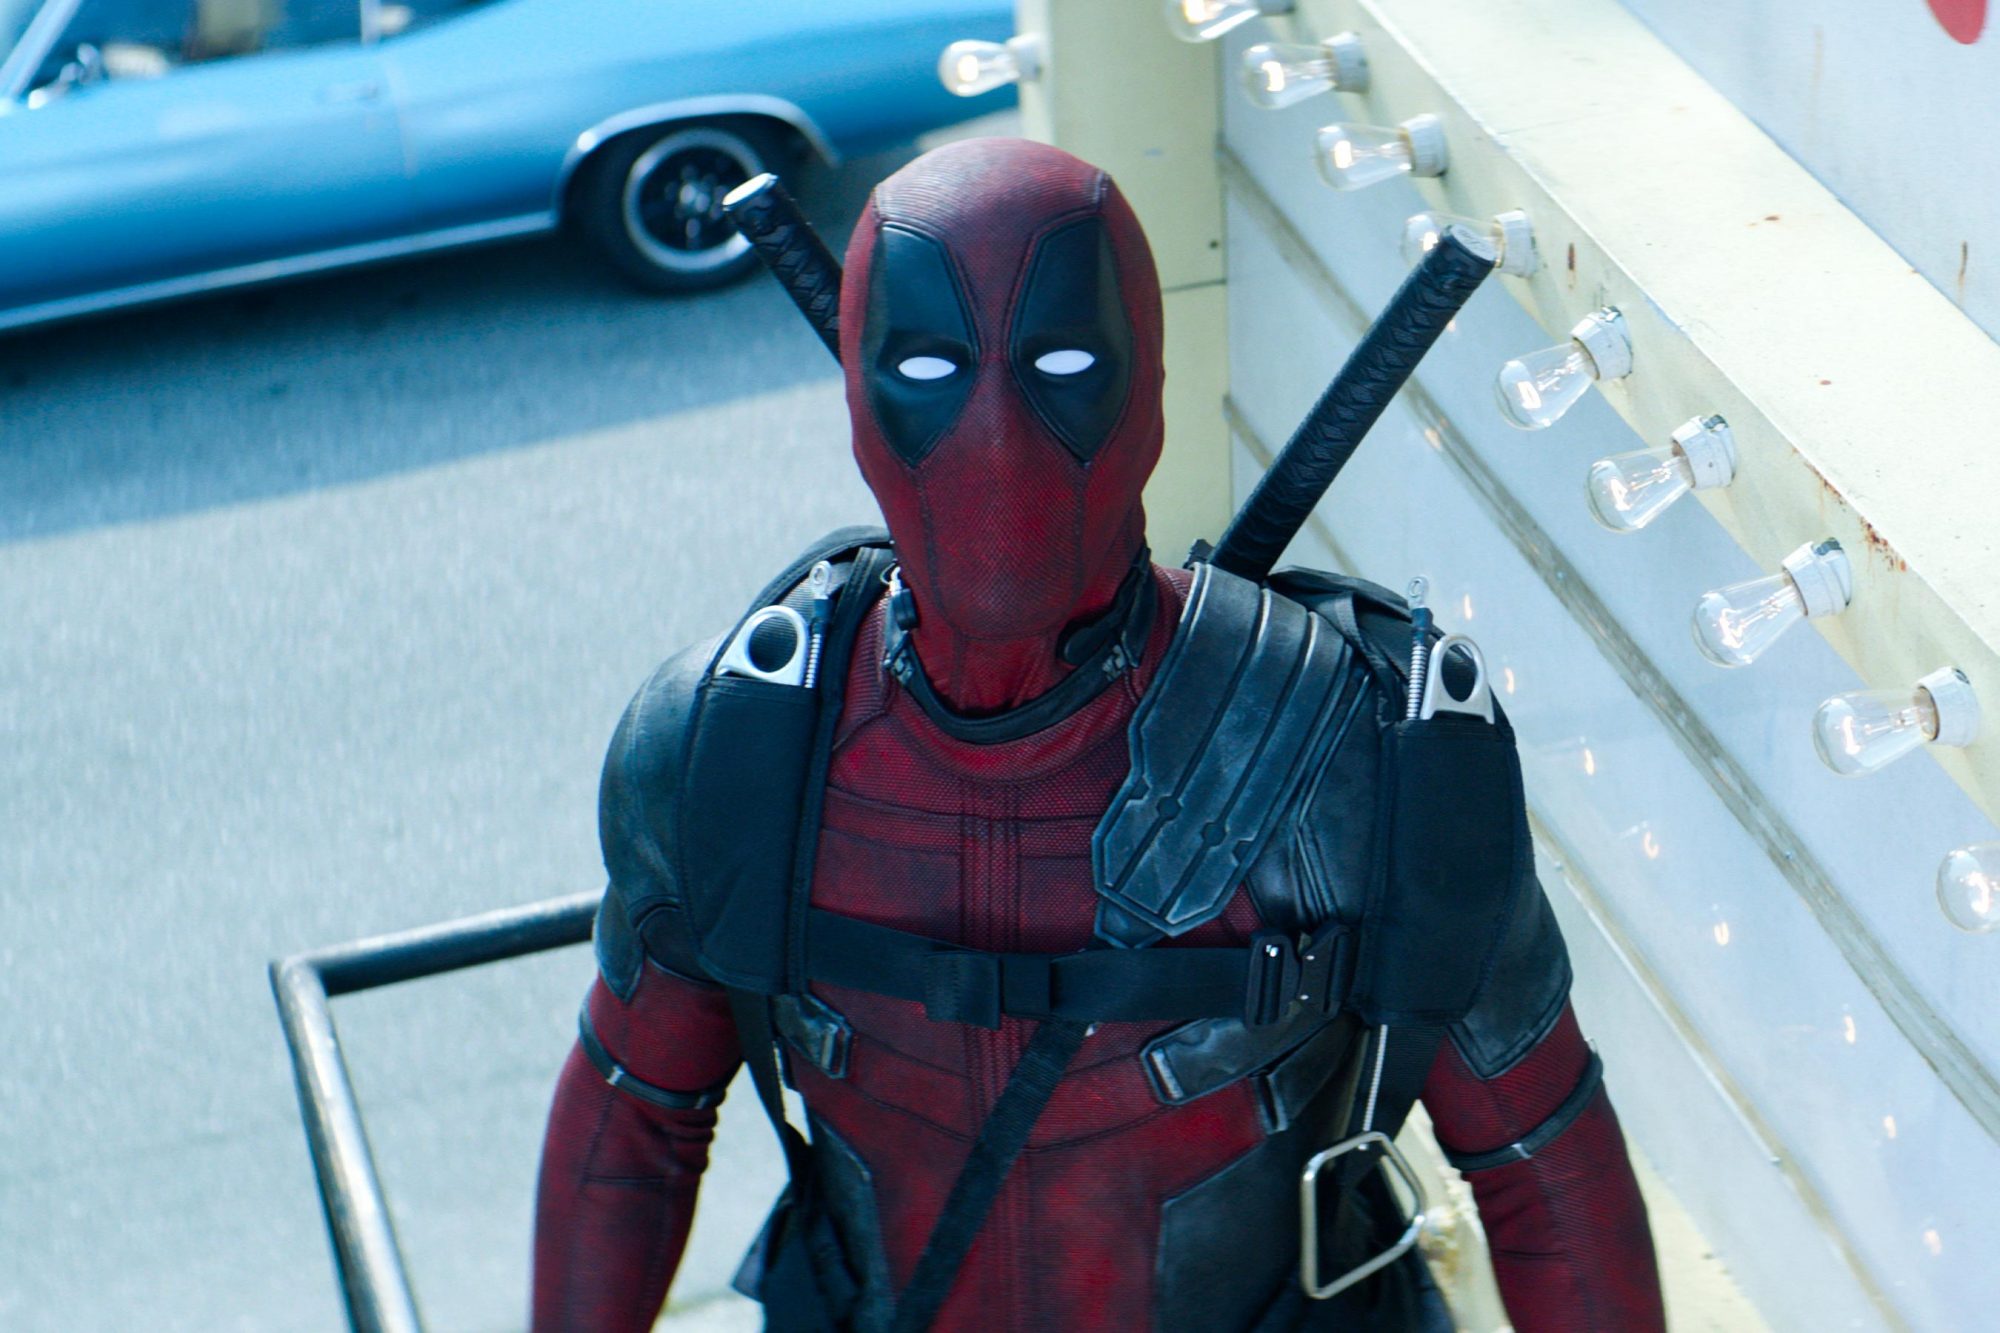 Ryan Reynolds says Disney passed on his Deadpool-Bambi crossover pitch